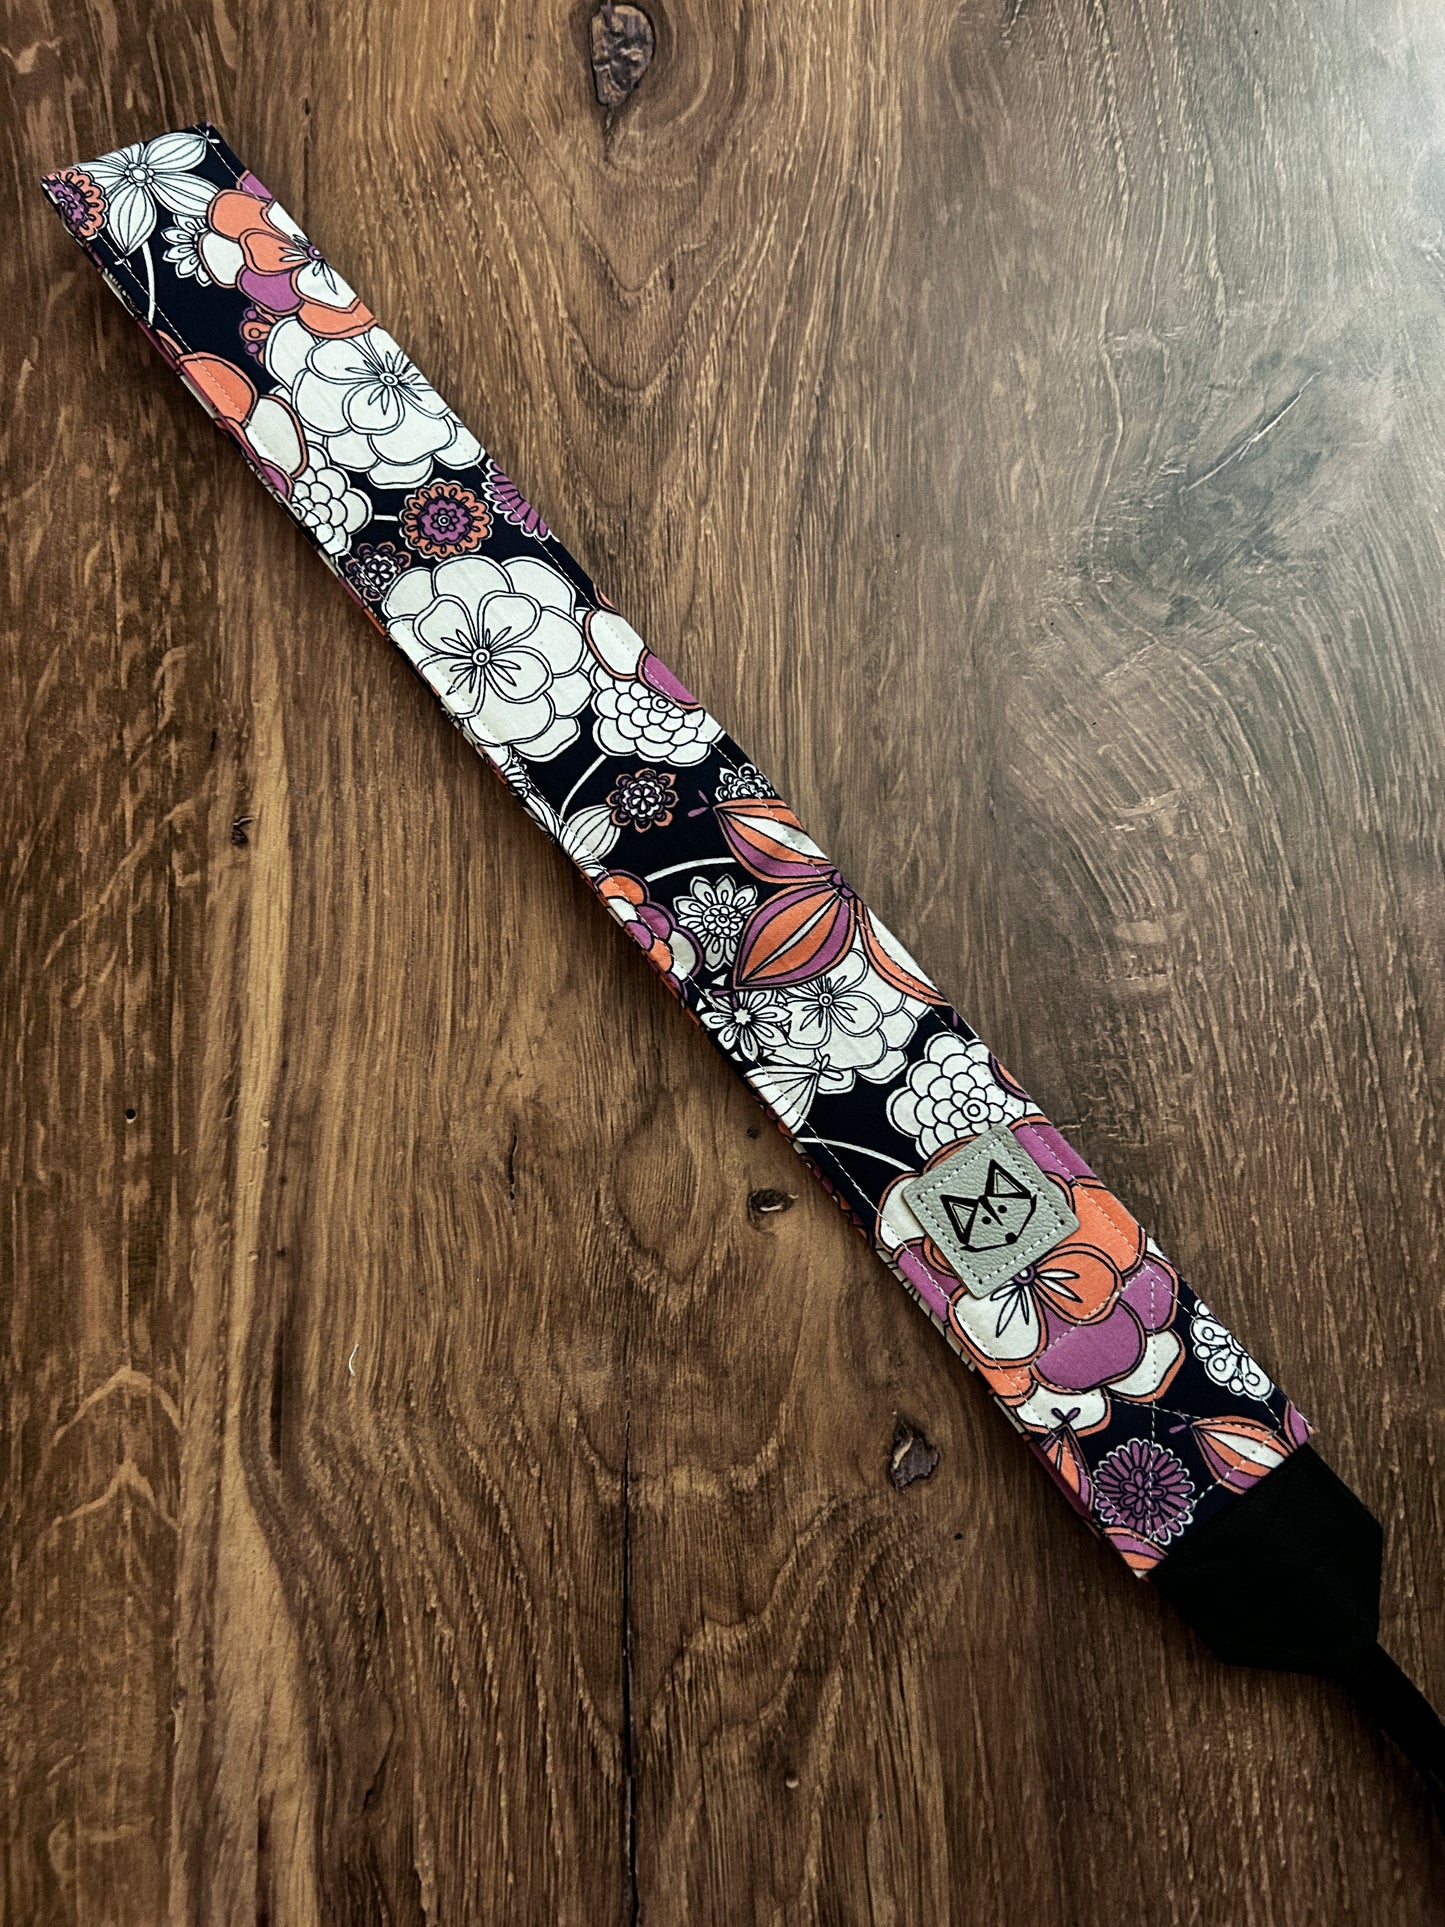 Flower Adjustable Handmade Fabric Camera Strap - DSLR Strap - Photography Accessories - Floral - Gift